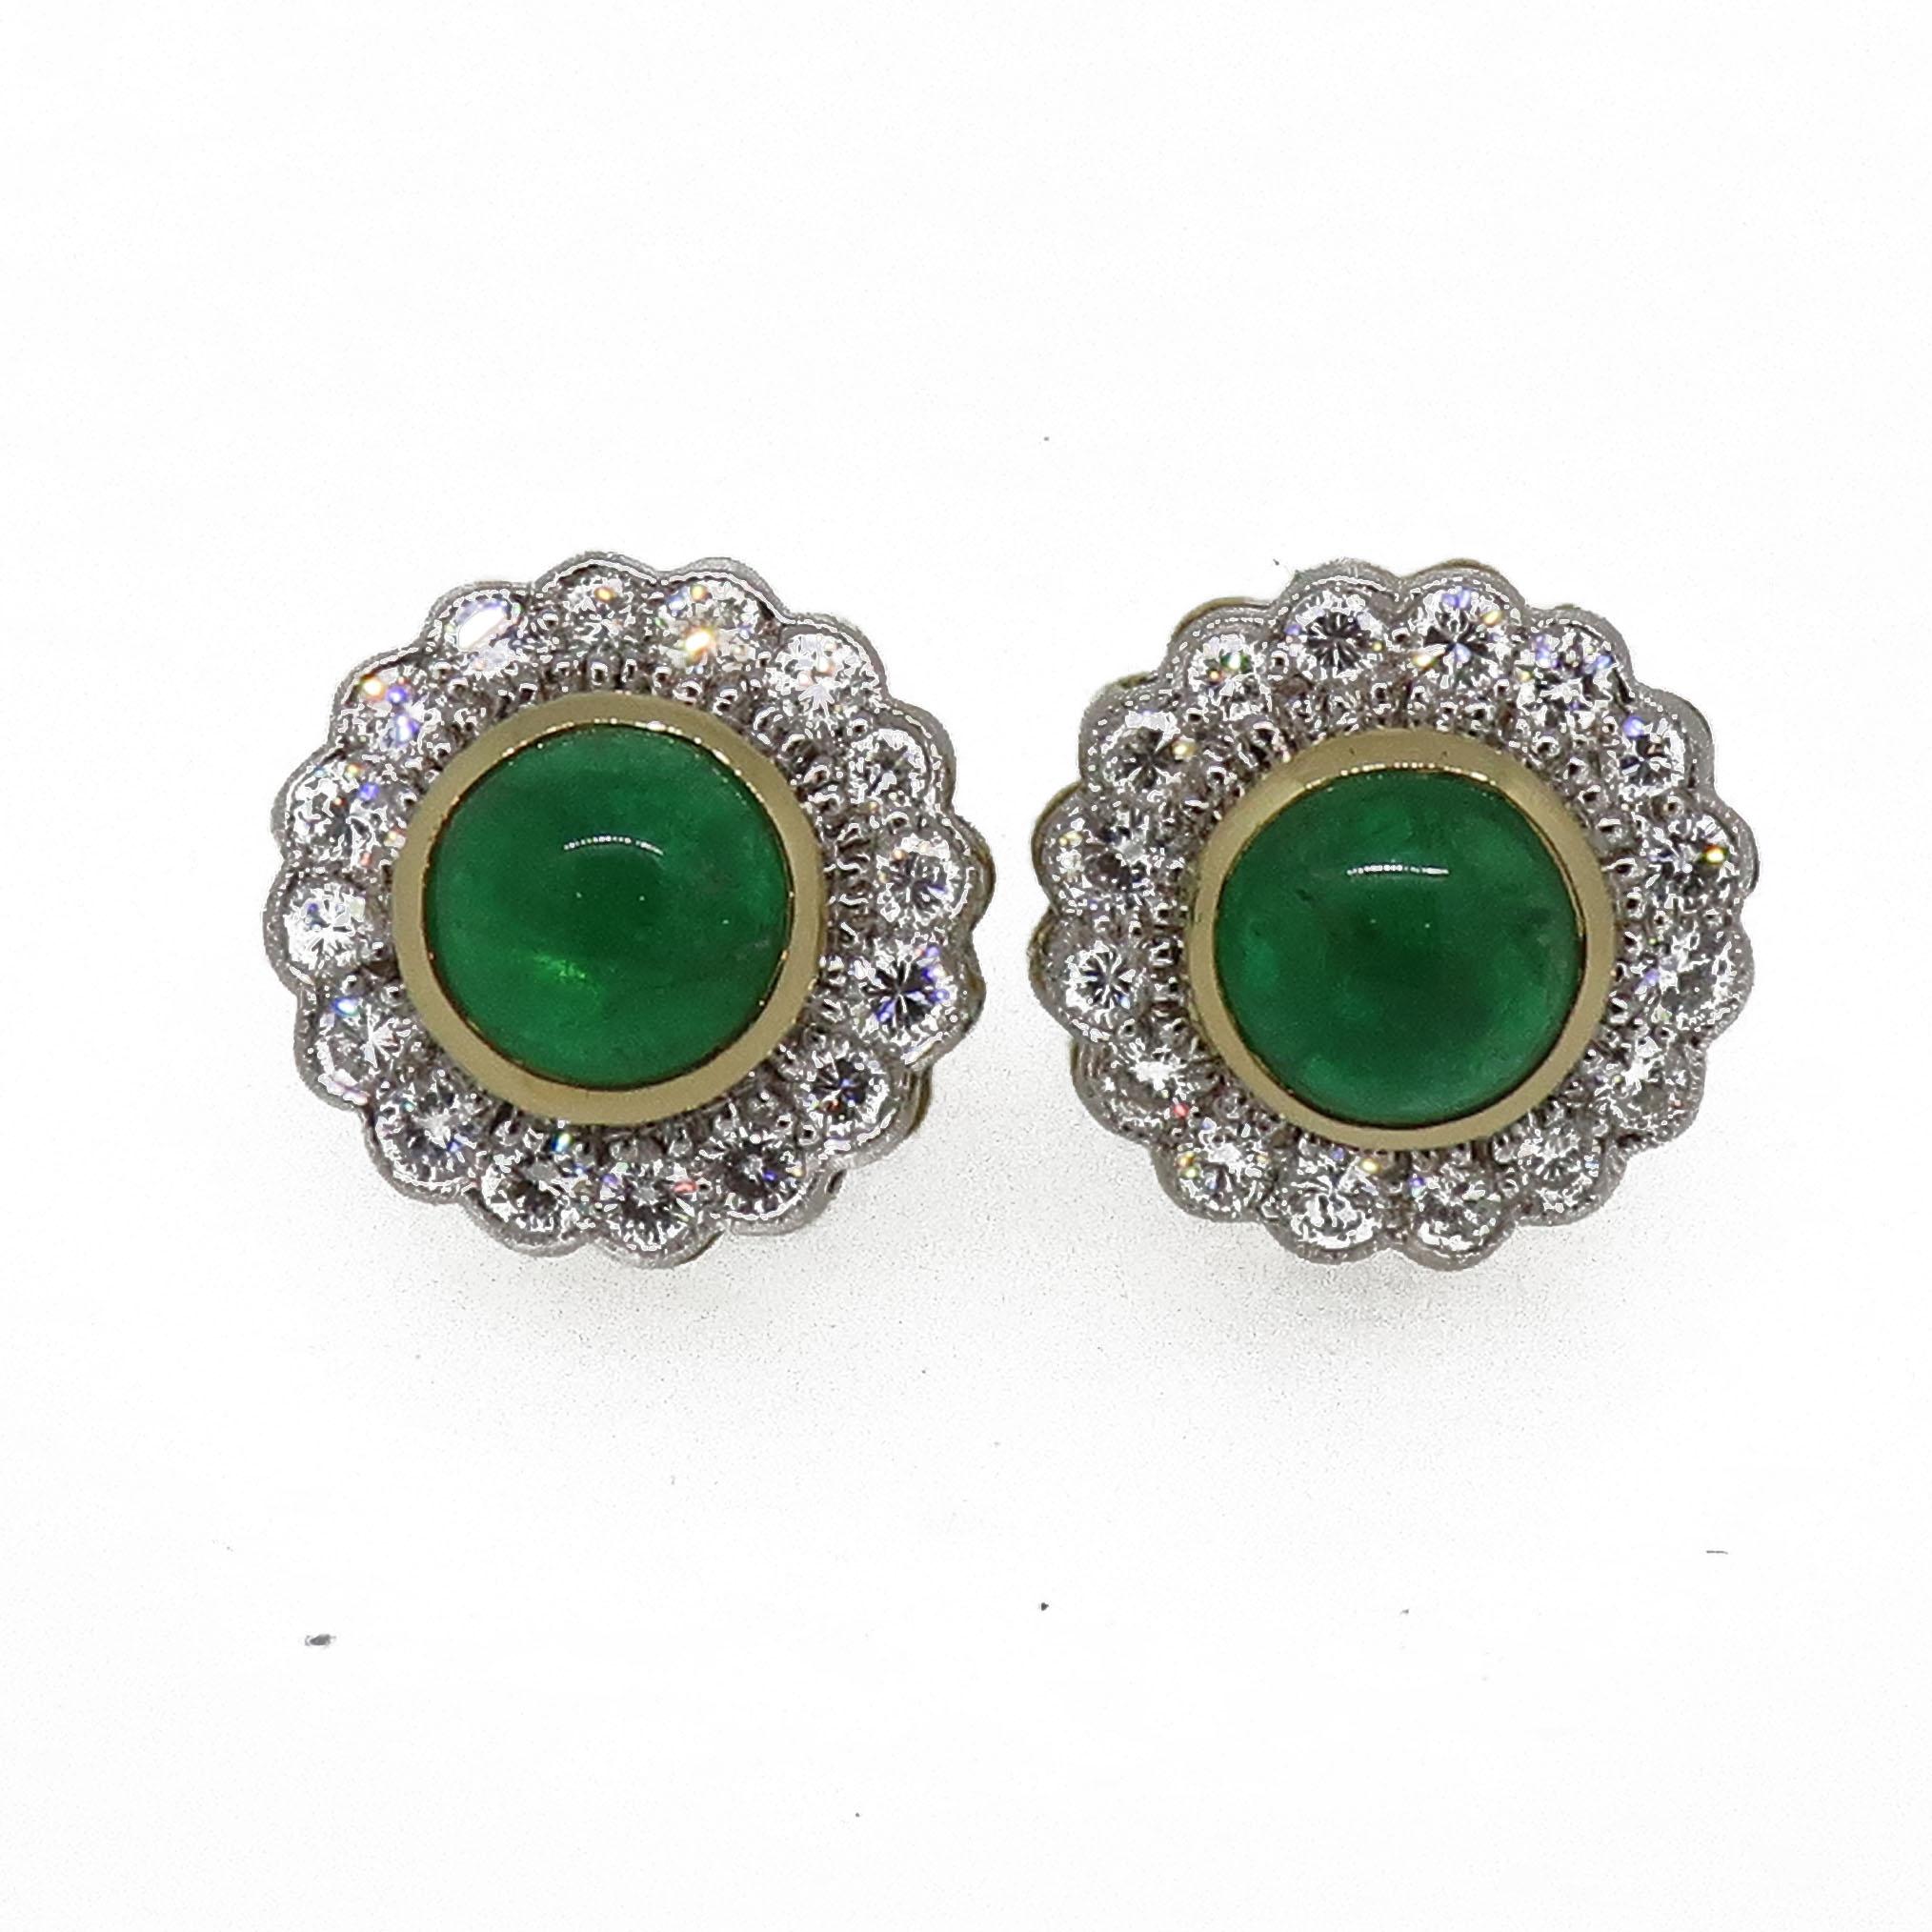 Women's 18 Karat Gold Round Cabochon Emerald and Diamond Art Deco Style Earrings For Sale